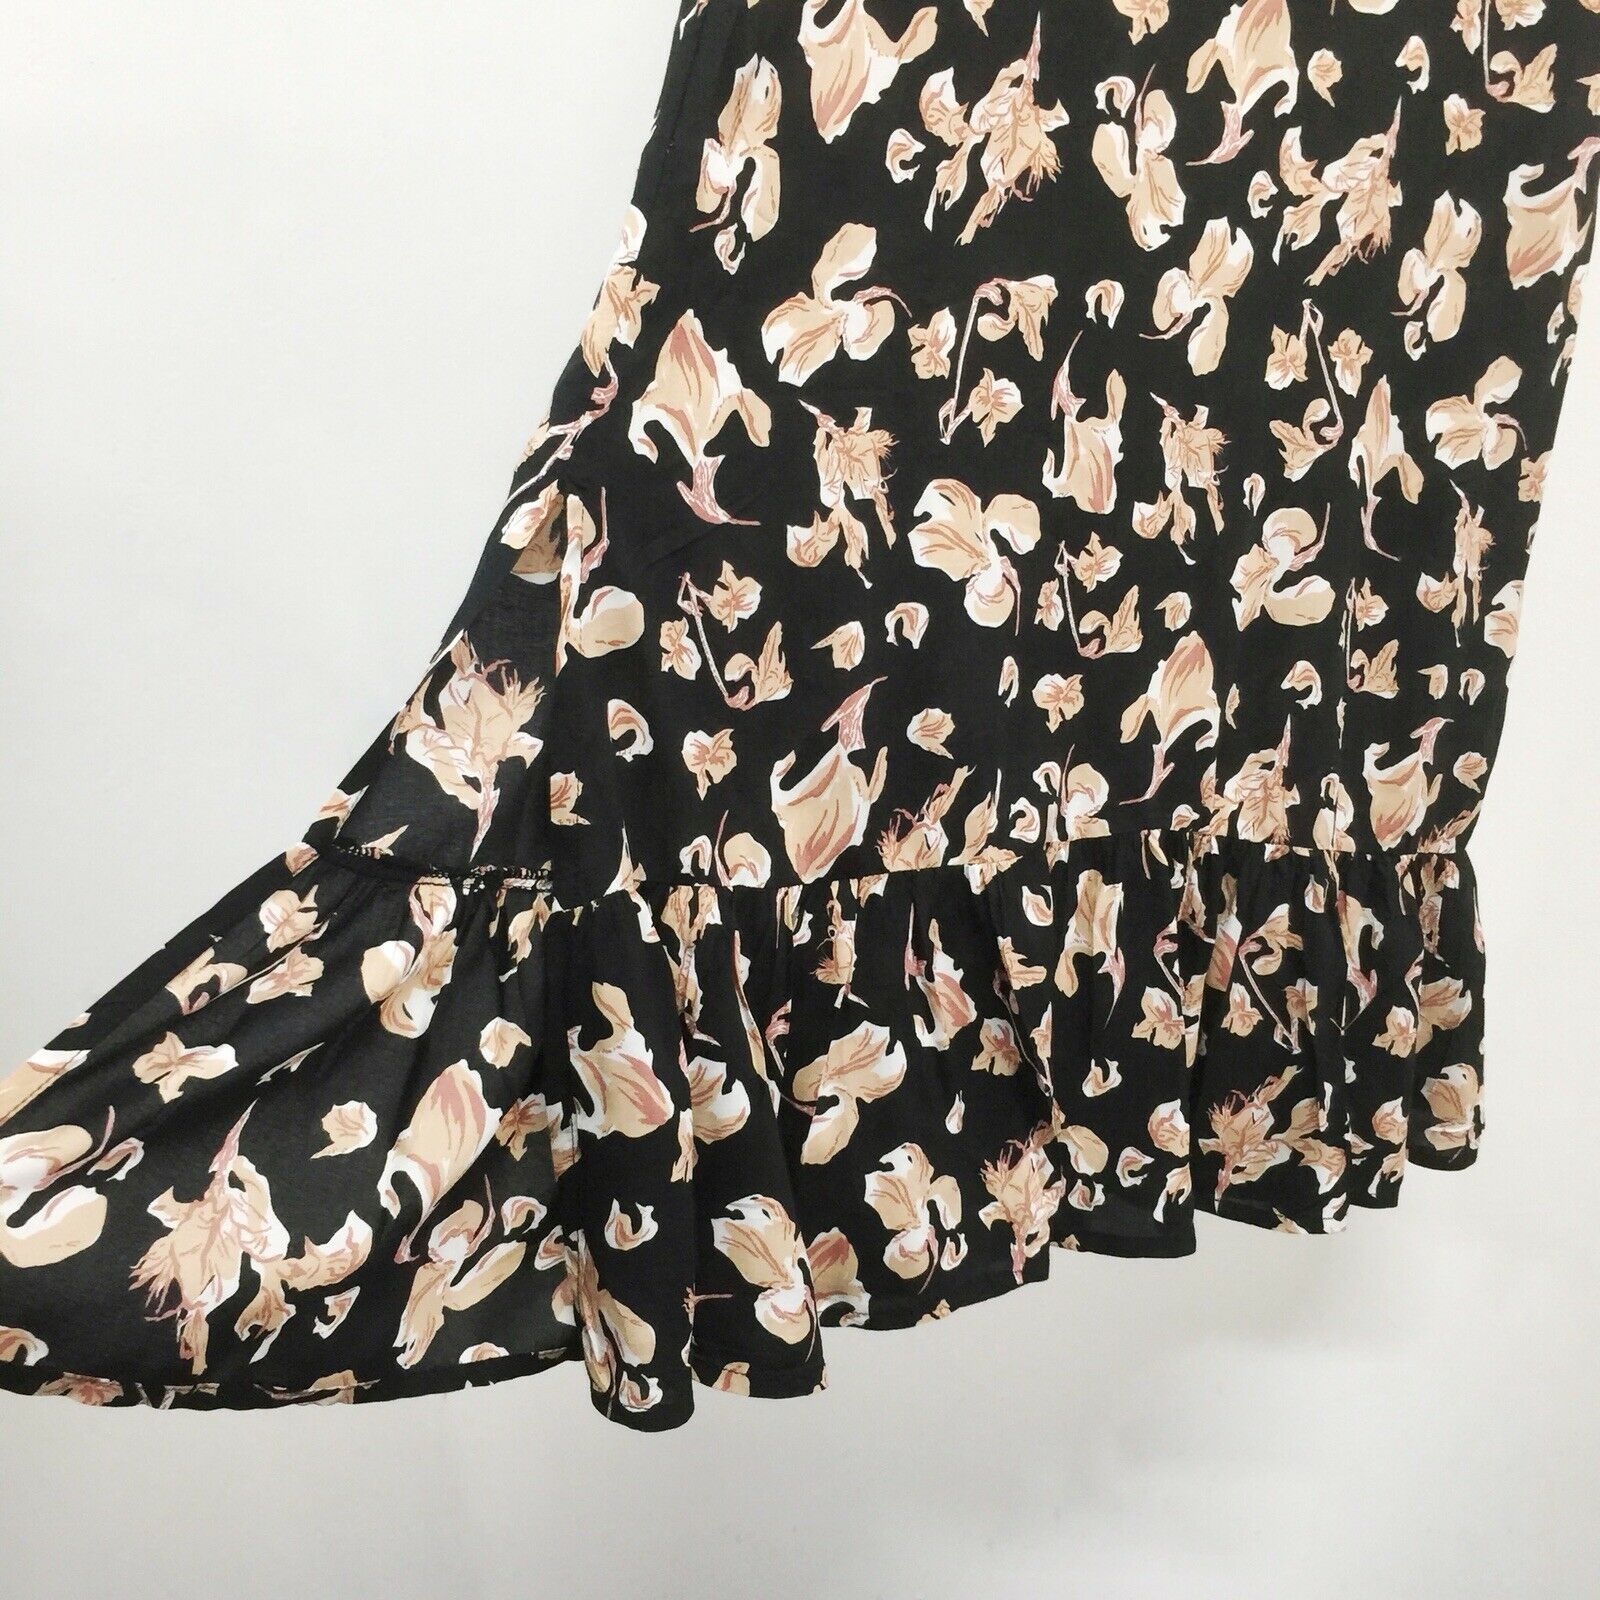 Bamboo Blonde Black Peach Floral Dress - Size S